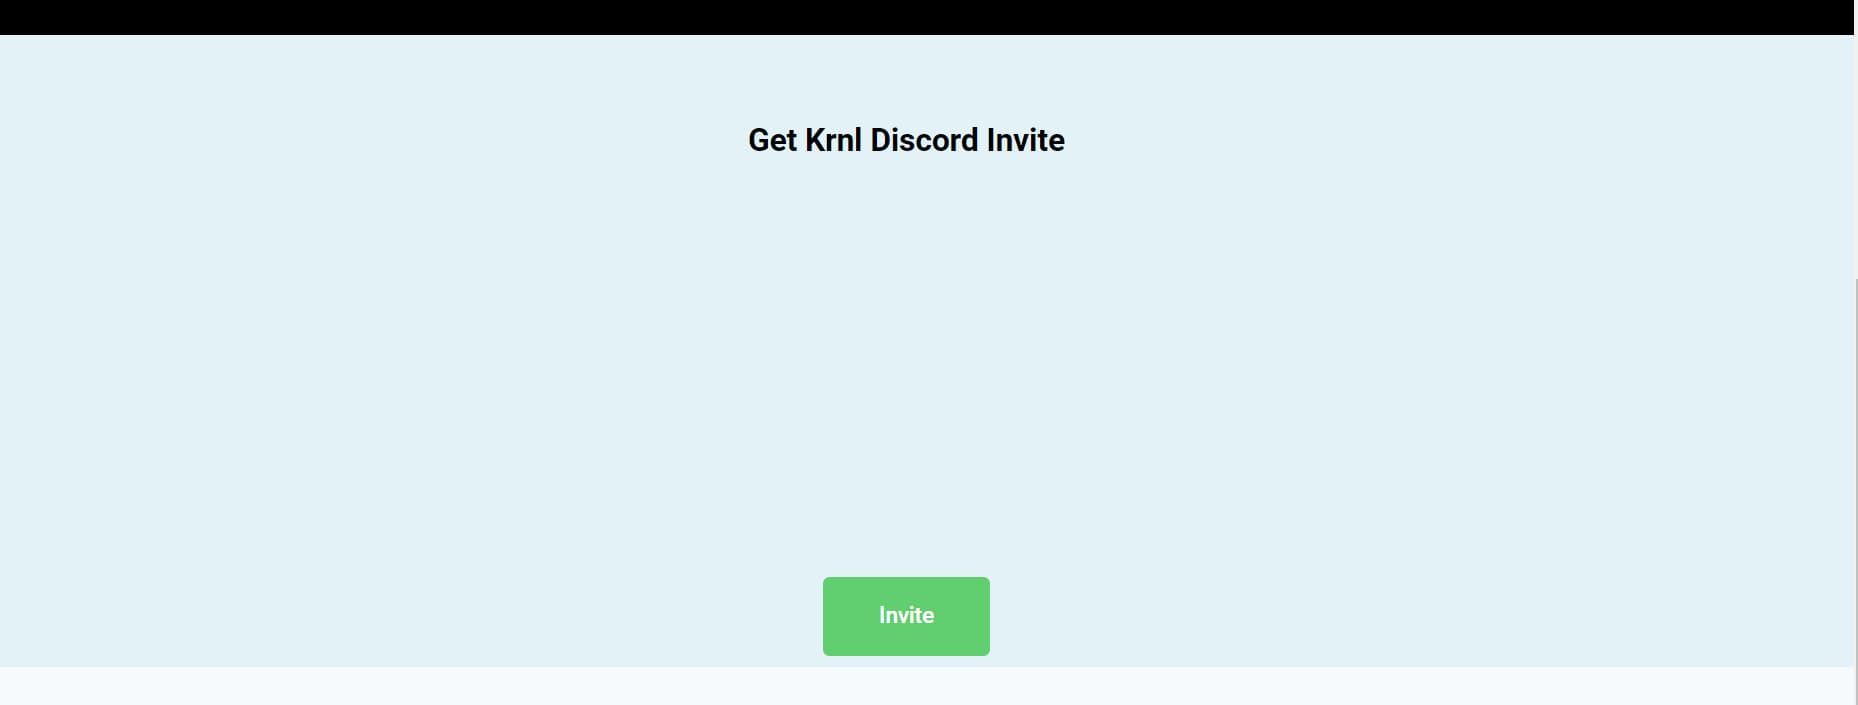 How to Join KRNL Discord Server?